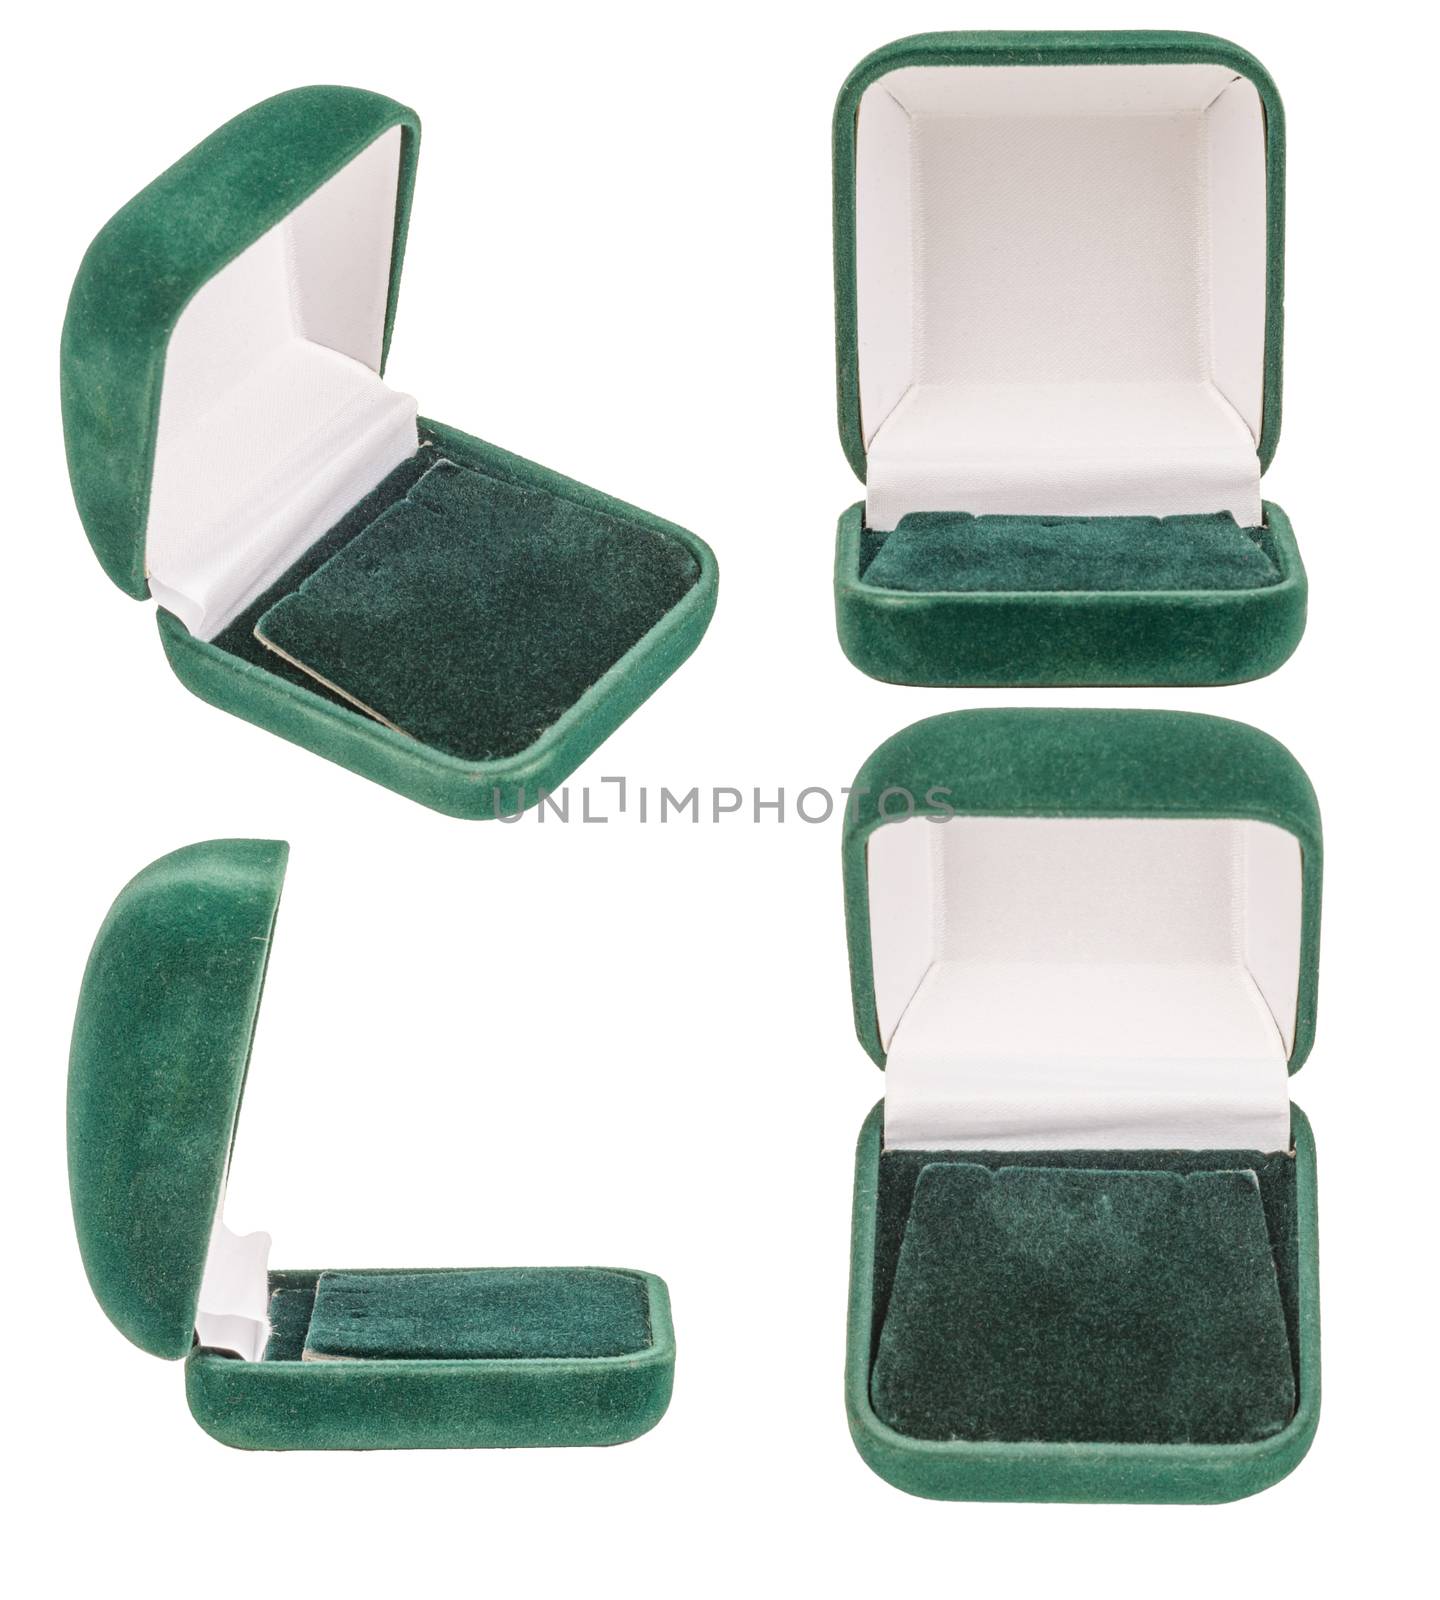 Set of Empty Green Velvet Opened Gift Jewelry Boxes. Isolated on White Background